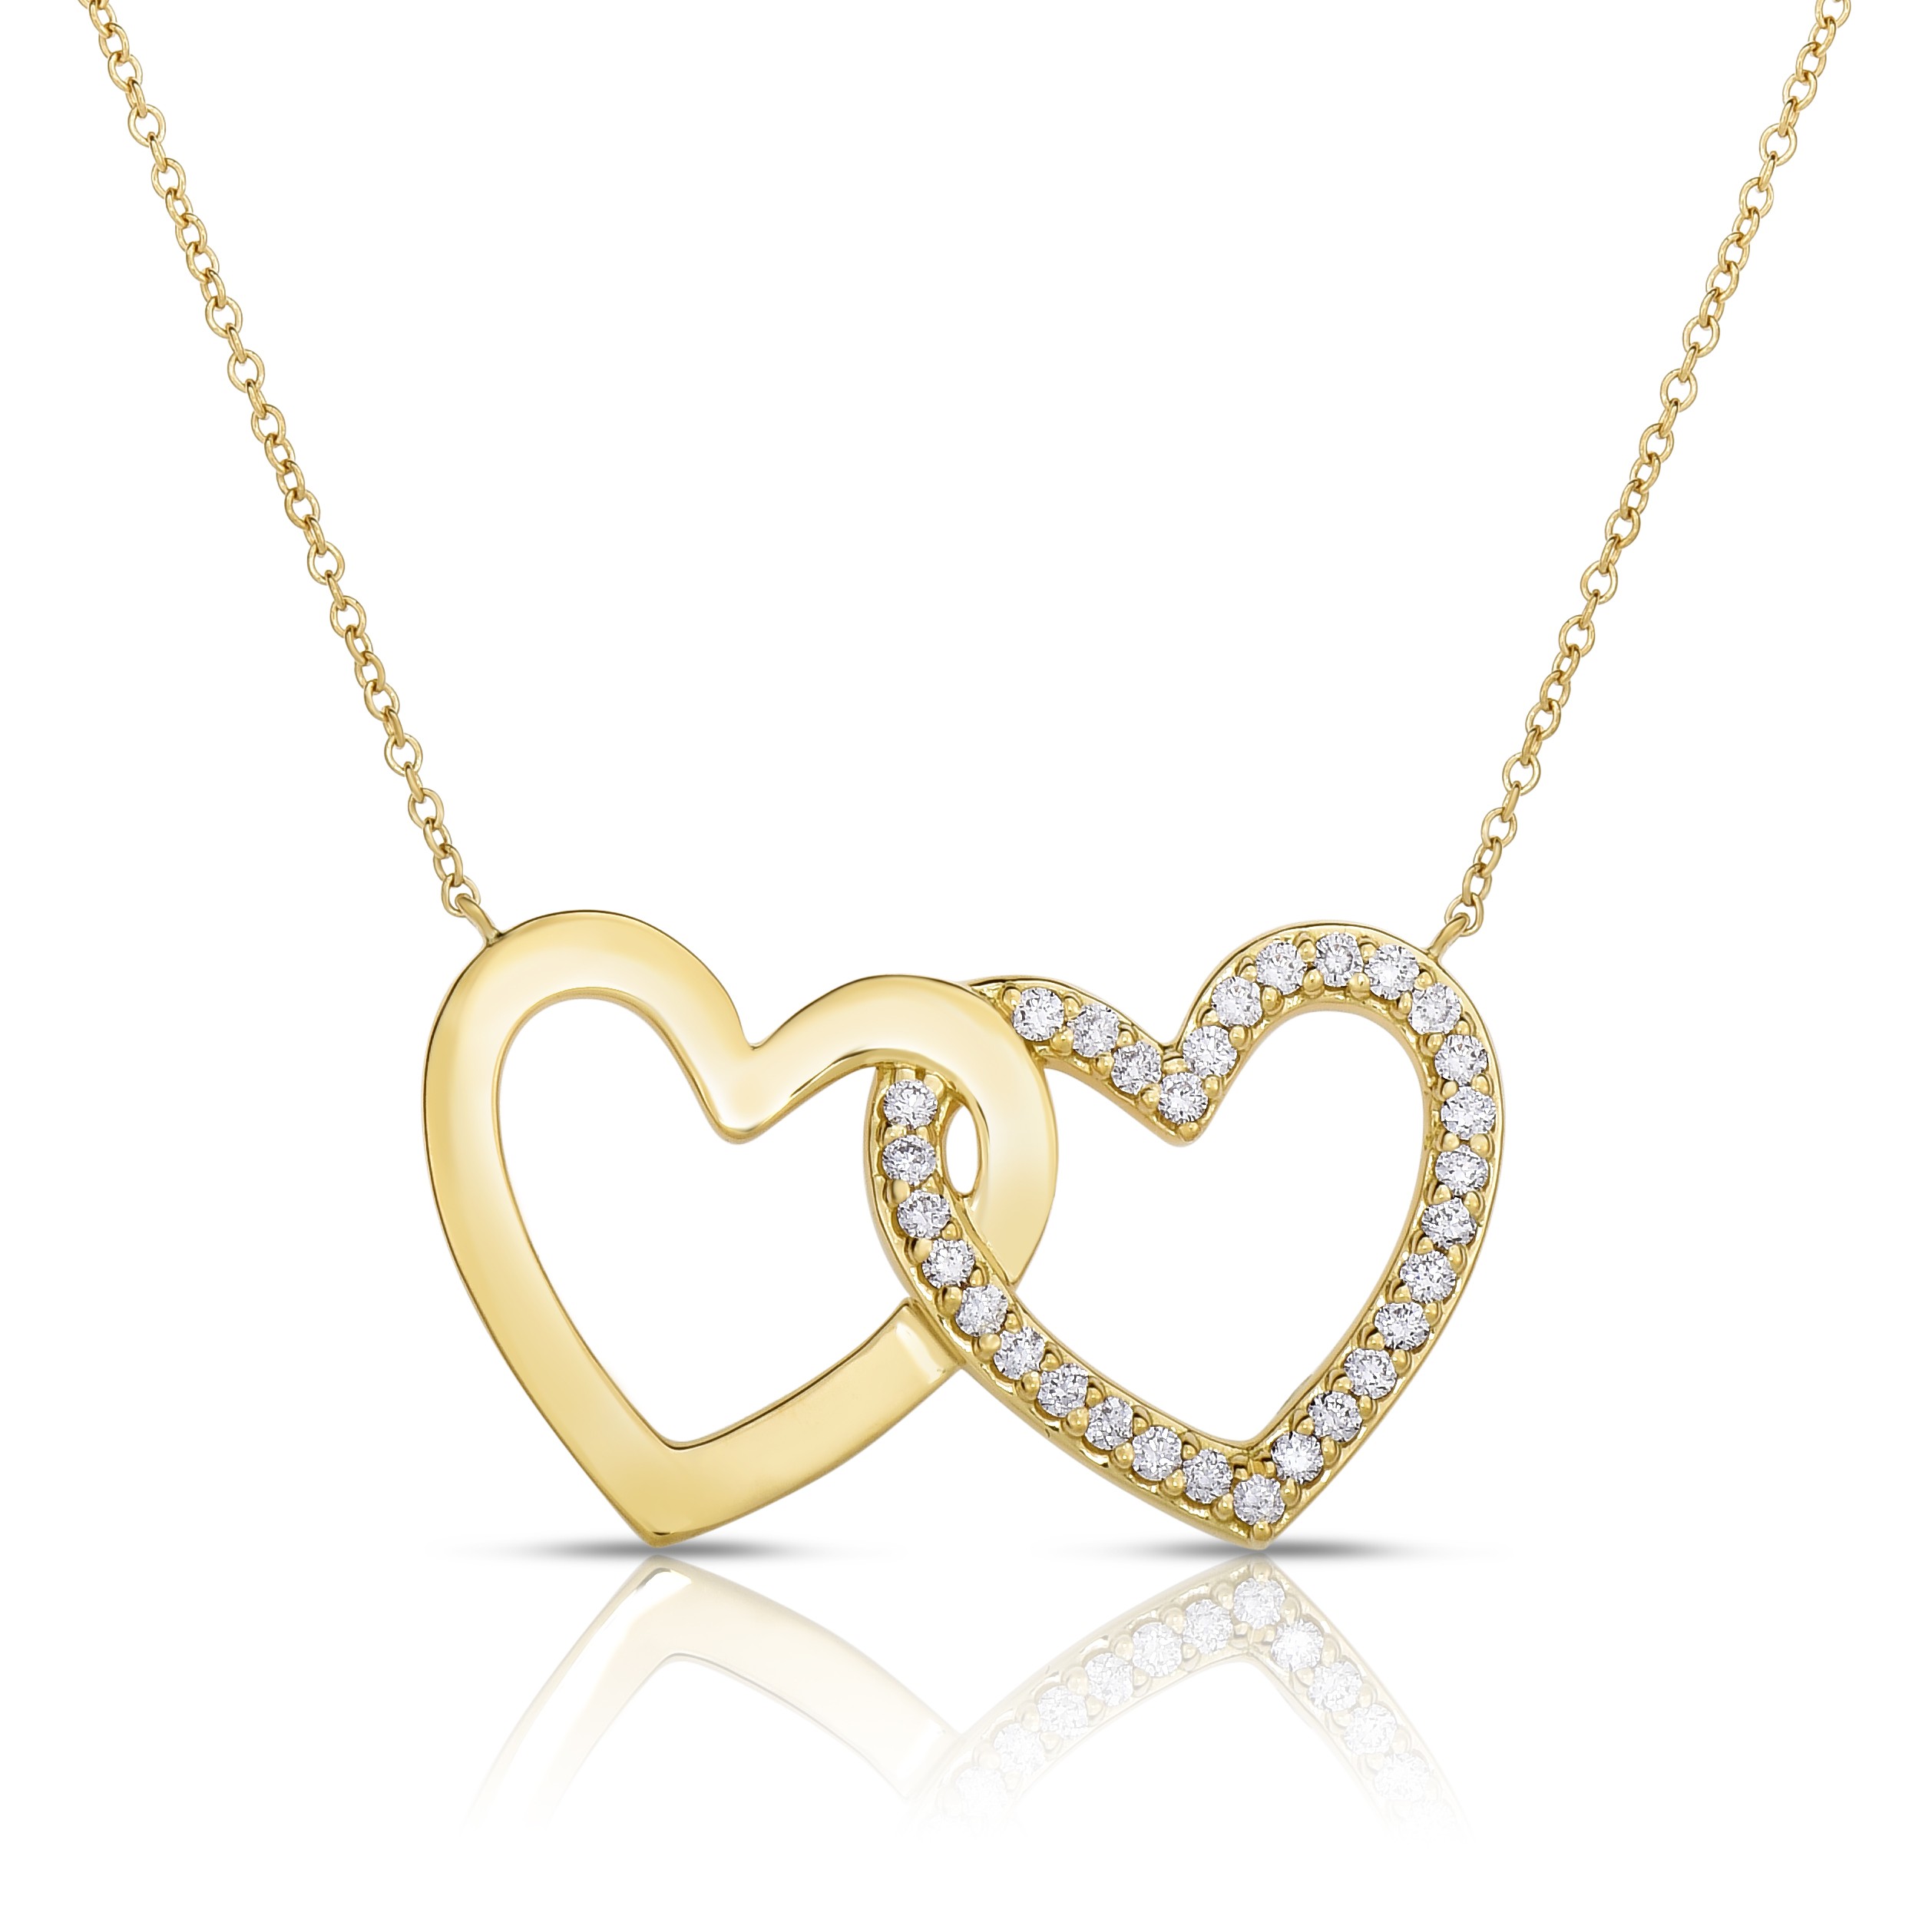 18K Yellow Gold 2 Hearts Love Bonds Pendant with Lab-Grown Diamonds on AIDIA Extendable Link Chain